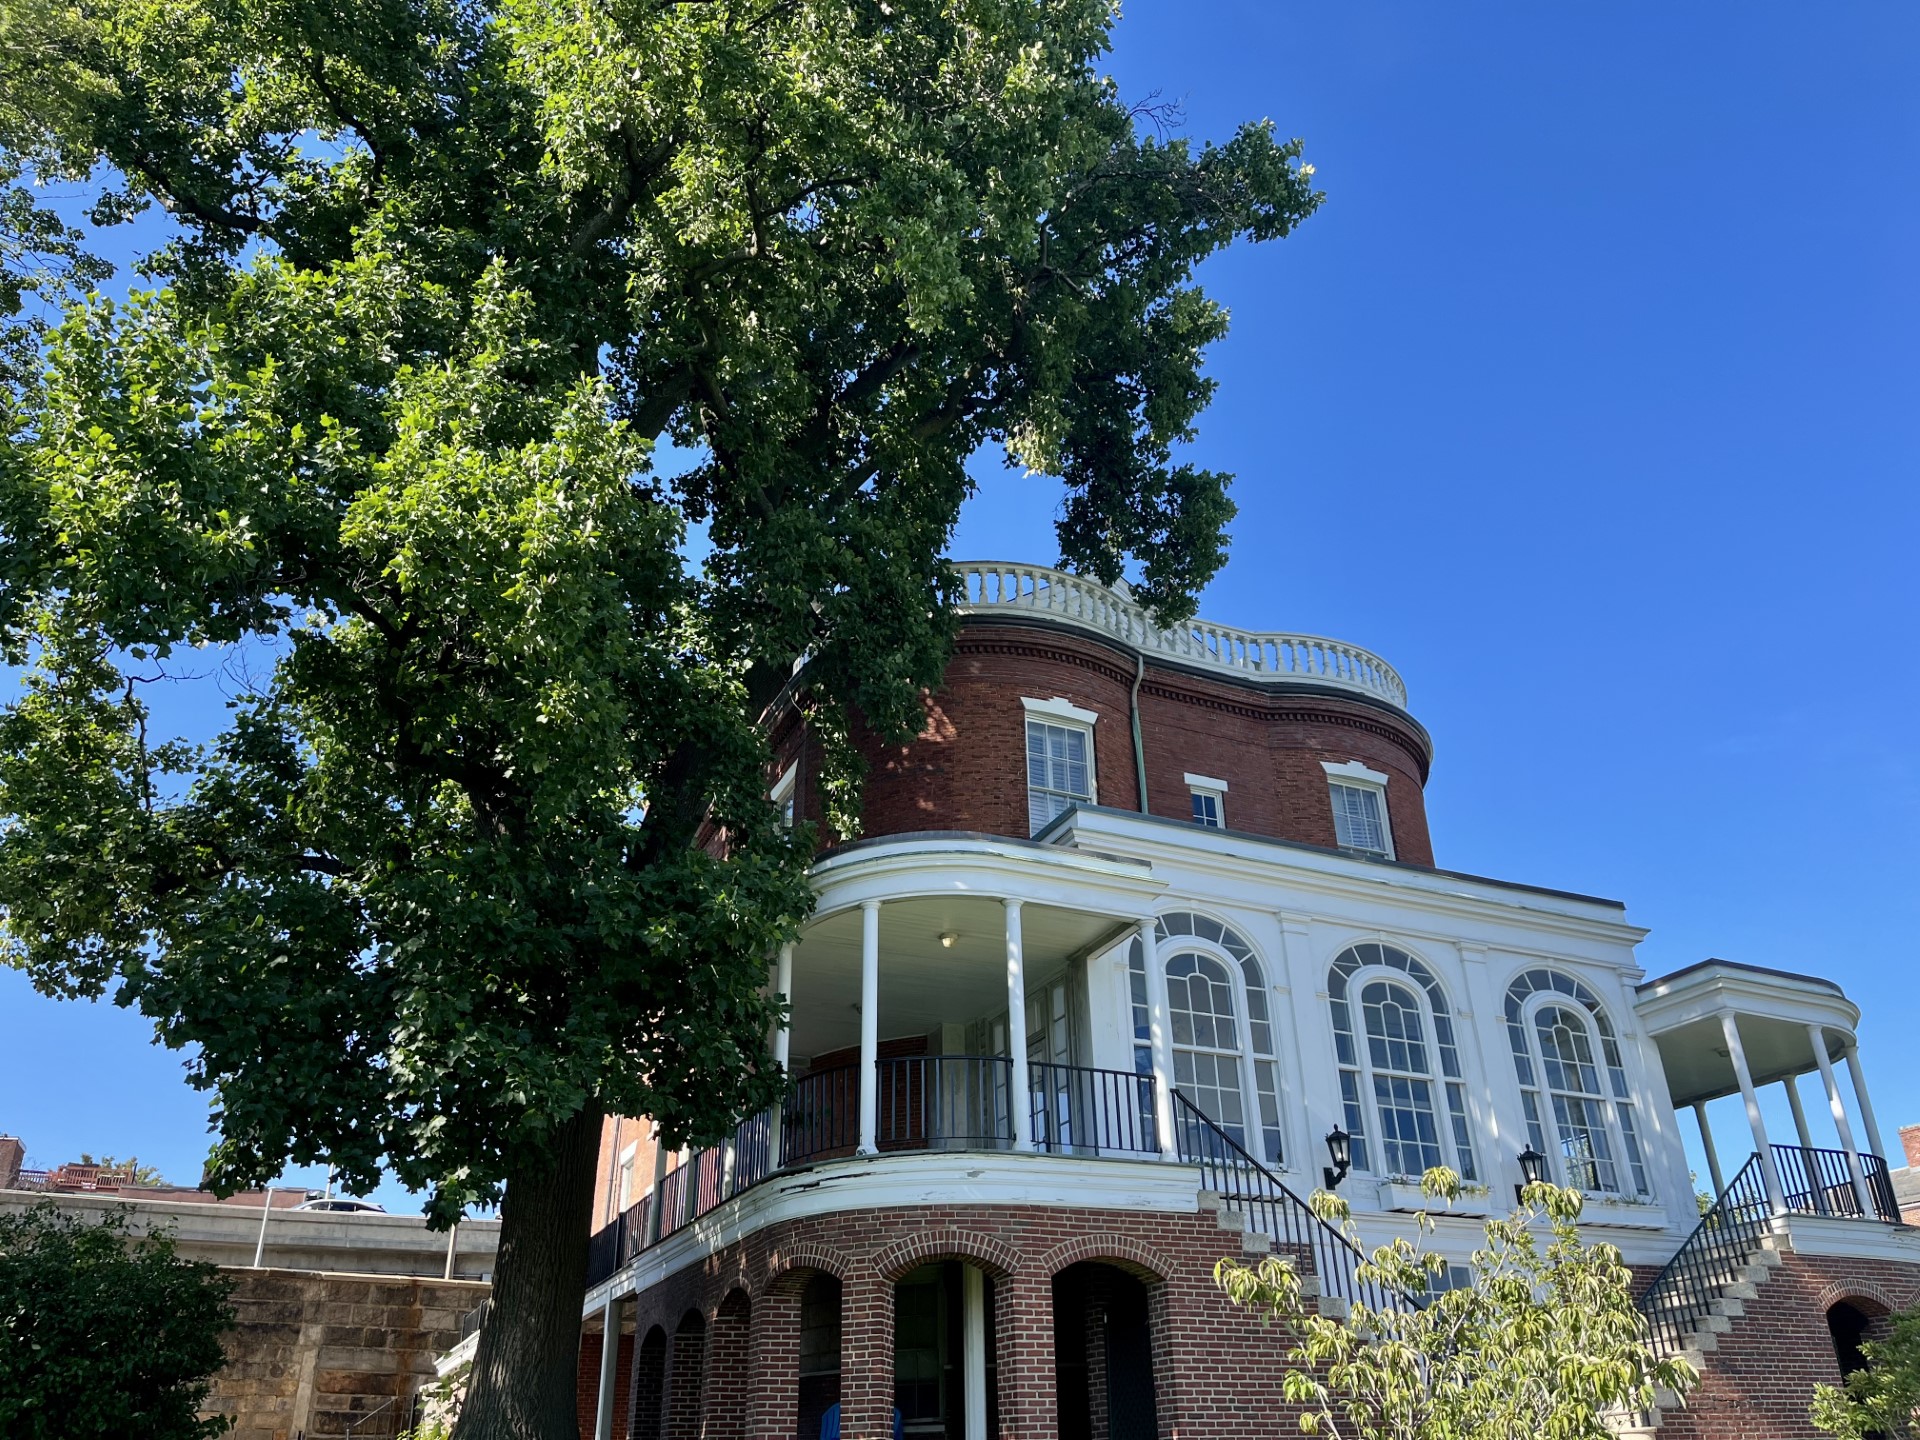 Angled view of the tuliptree outside of the Commandant's house in the Charlestown Navy Yard, MA. The Commadant's House is a historic brick building with two curved porches in the front, with a glassed in front porch section with stairs leading up.